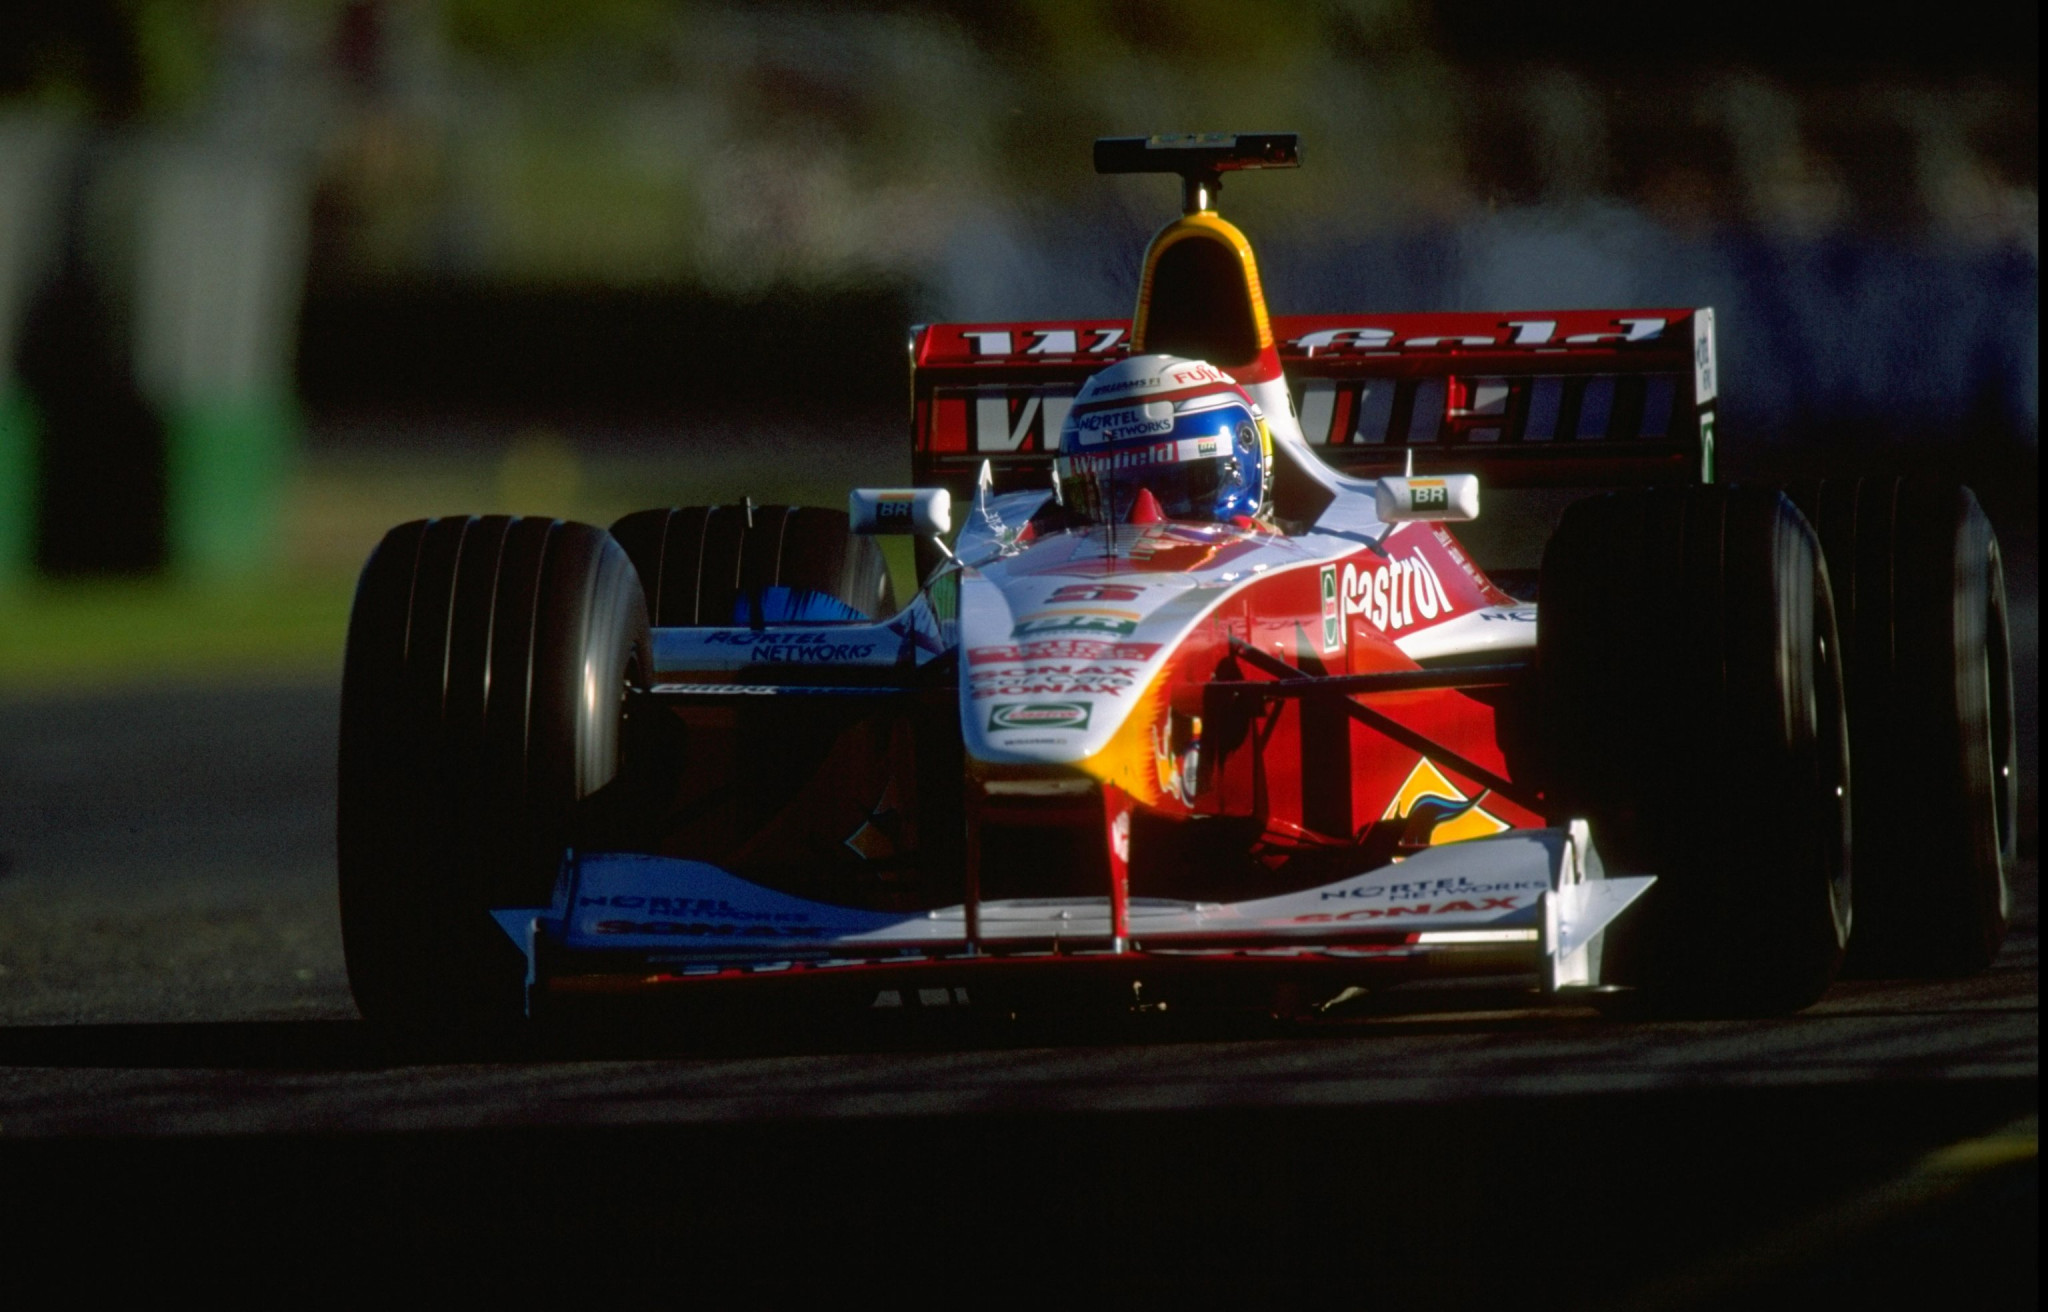 Alex Zanardi competed in Formula One for five seasons ©Getty Images